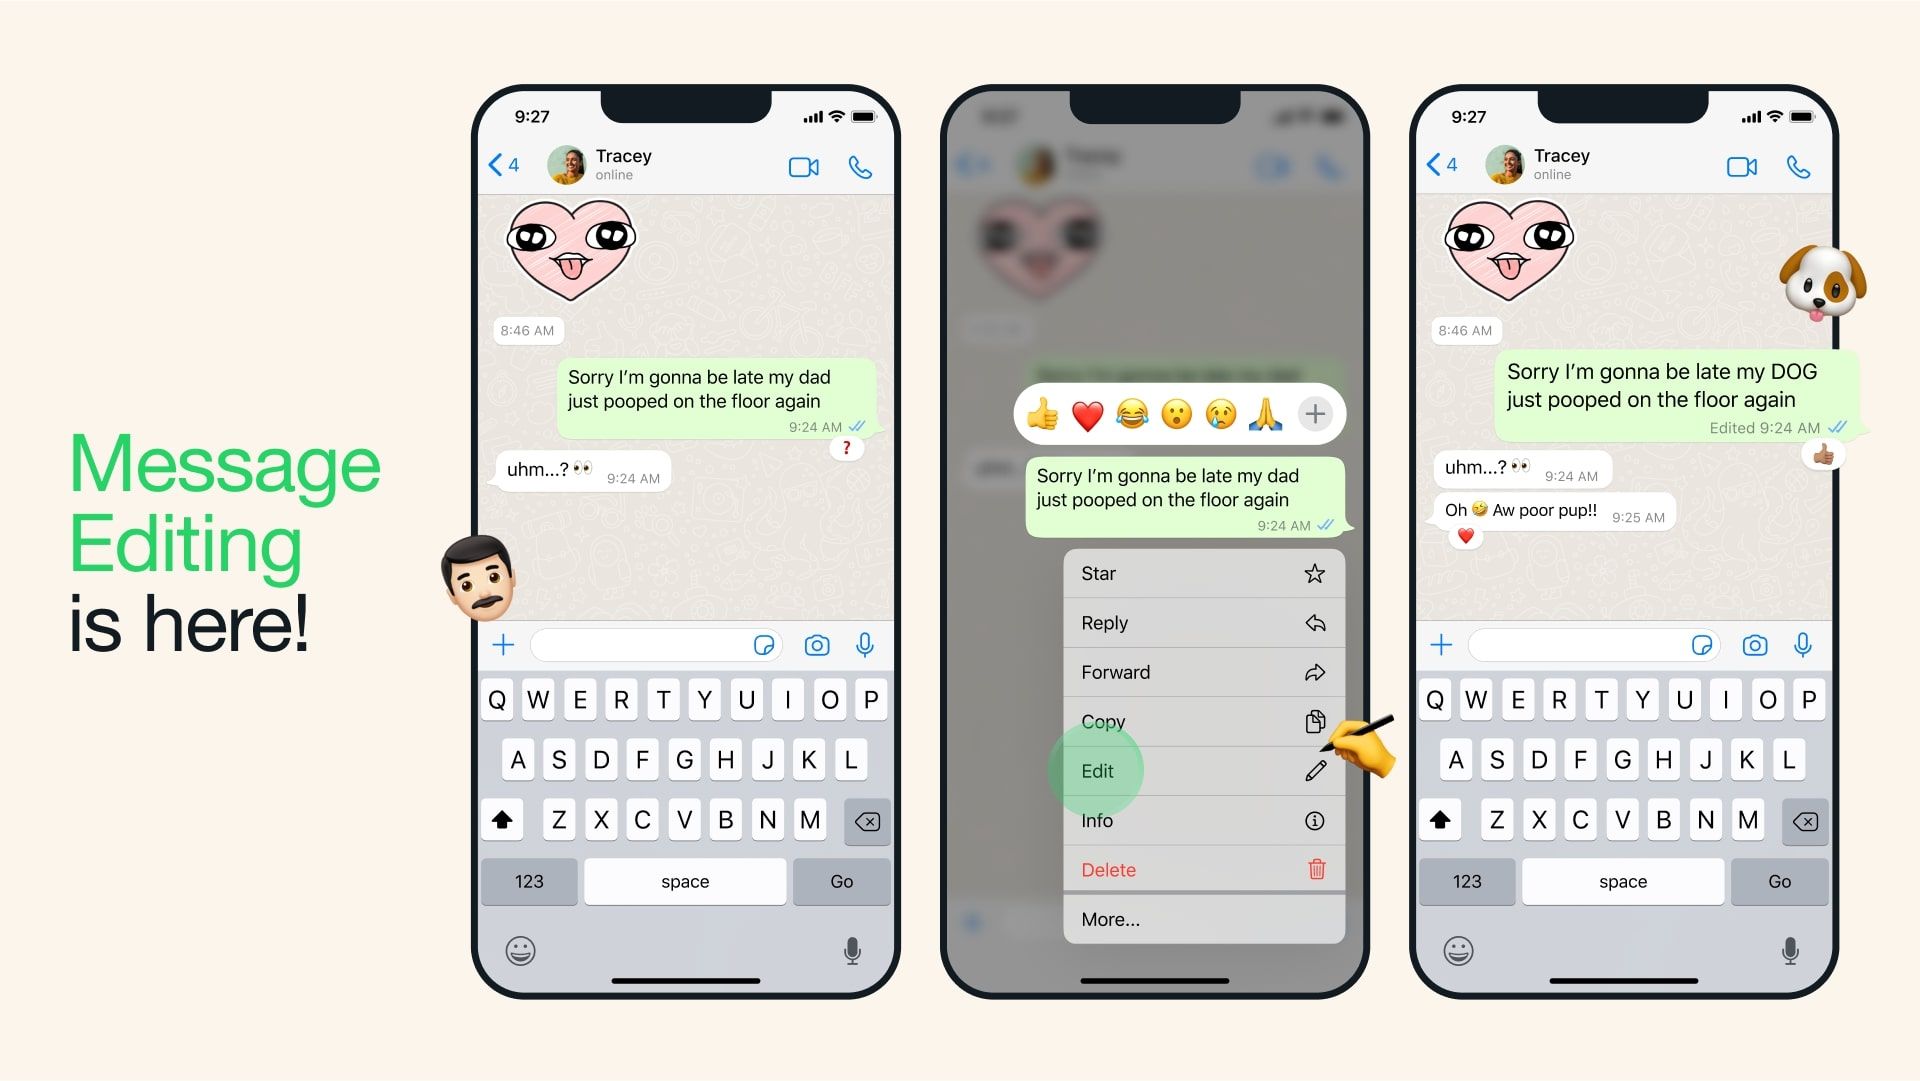 Major WhatsApp updates and features coming in 2023